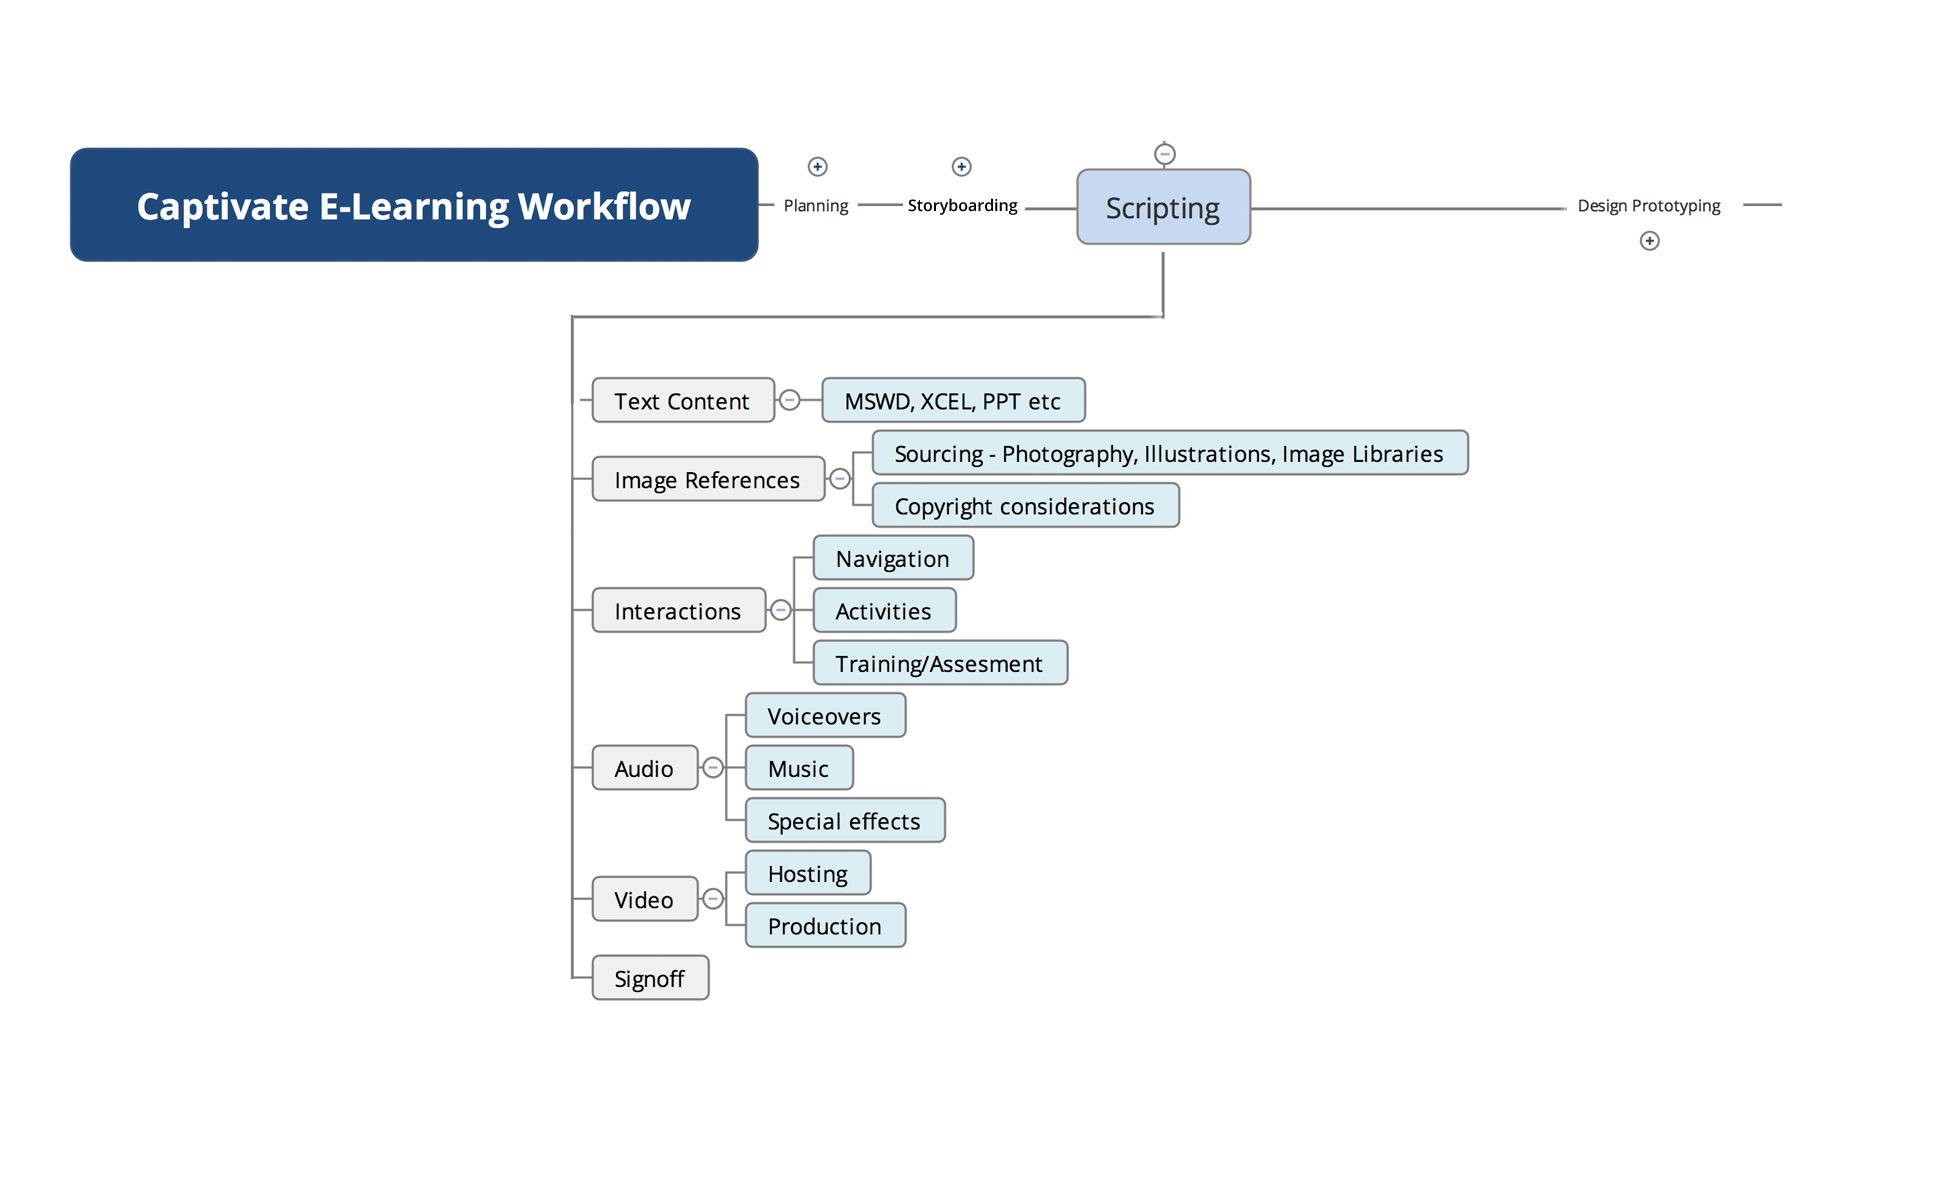 Captivate E-Learning Workflow